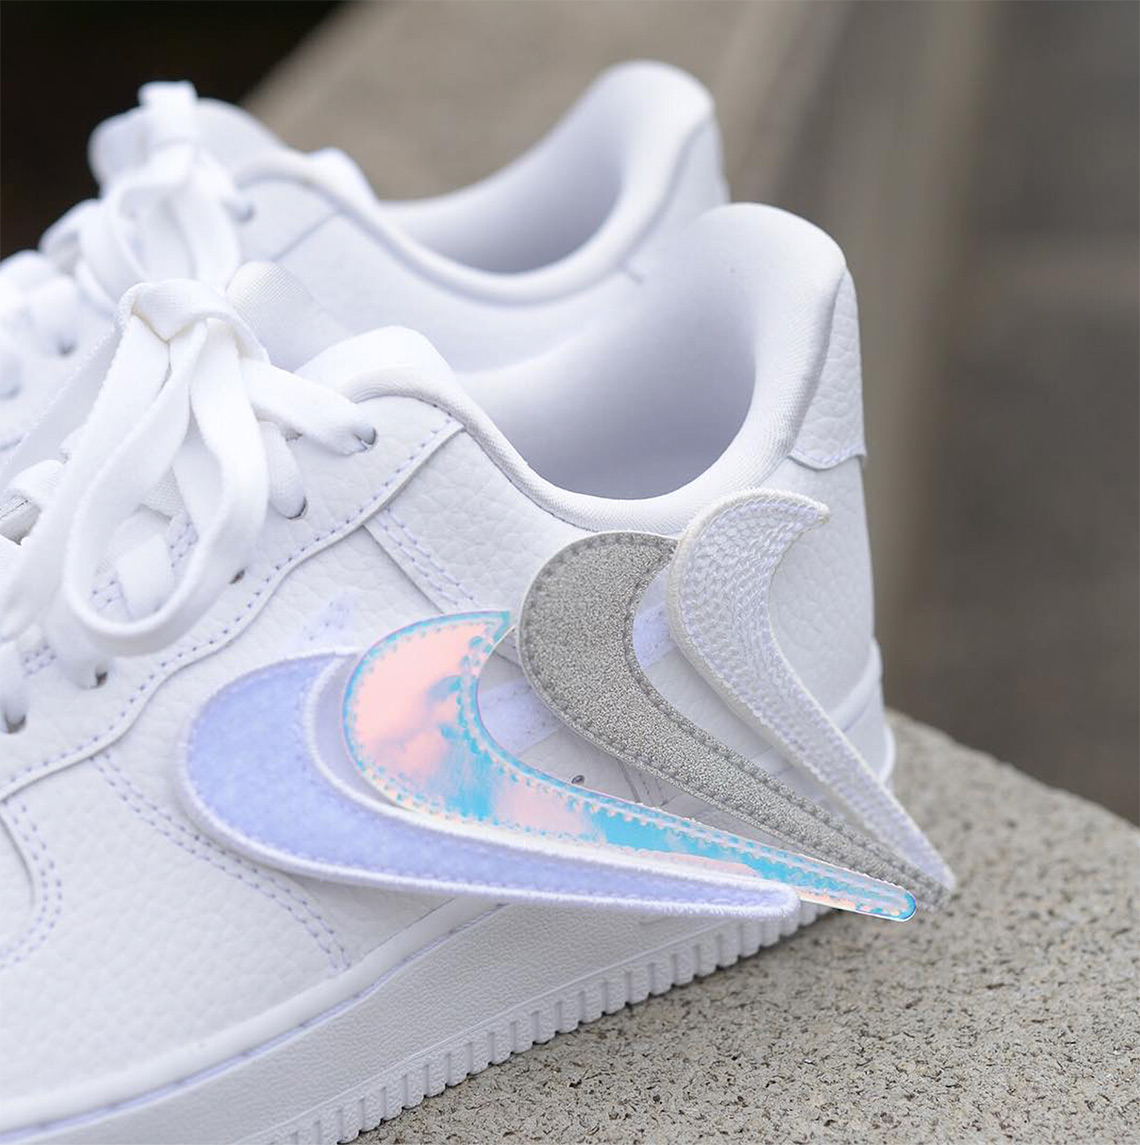 Now Available: Women's Nike Air Force 1-100 "Swoosh Shouts